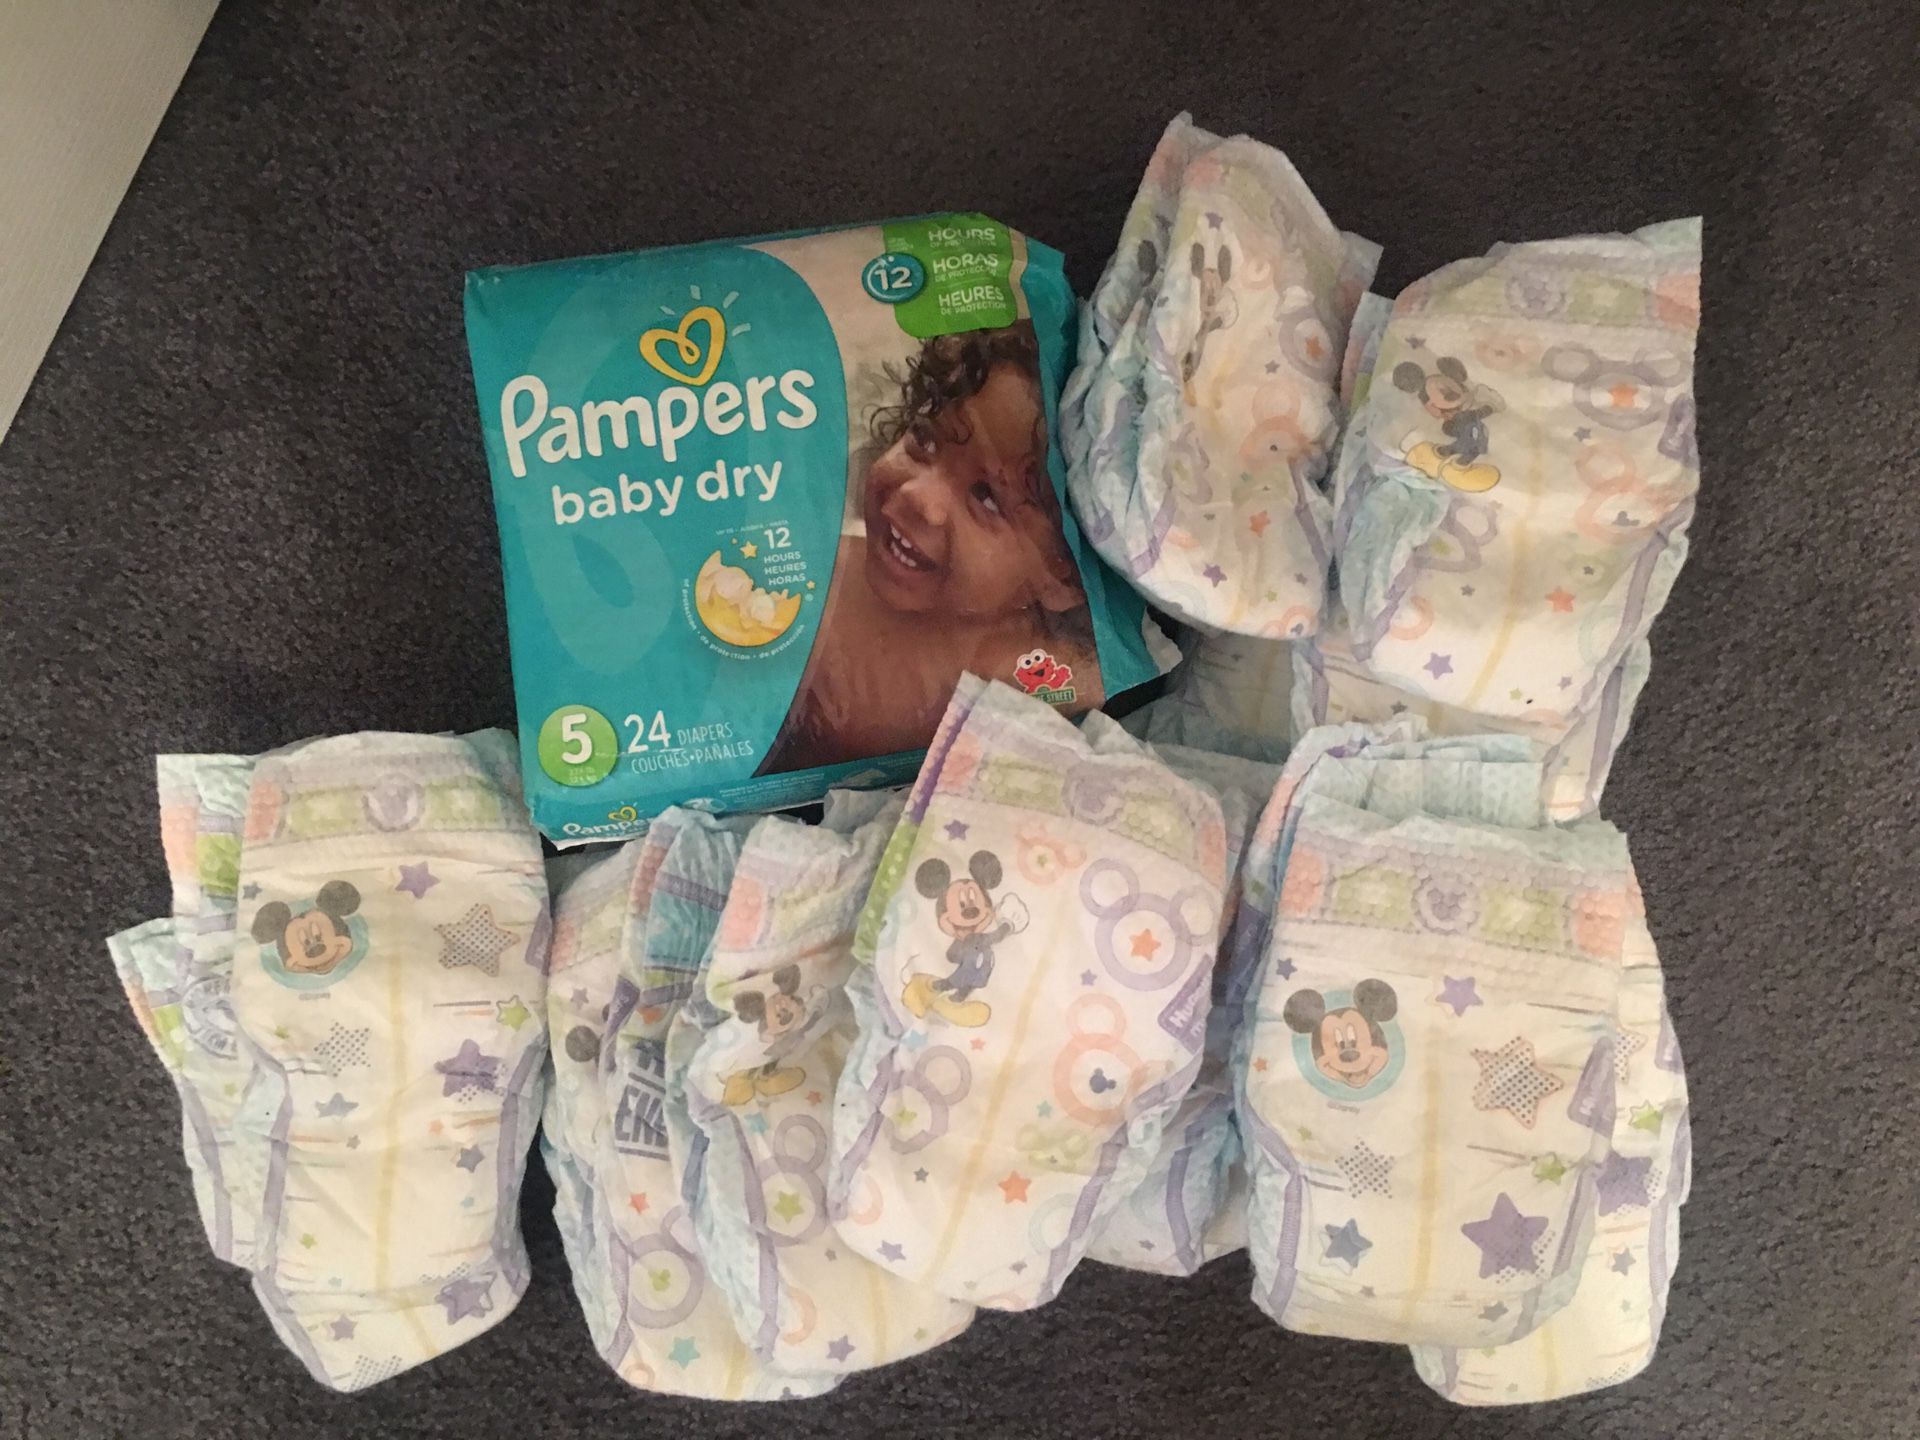 Pampers 24 Pack Baby Dry Size 5 and 27 New OPENED Huggies Little Movers Size 4 Diapers